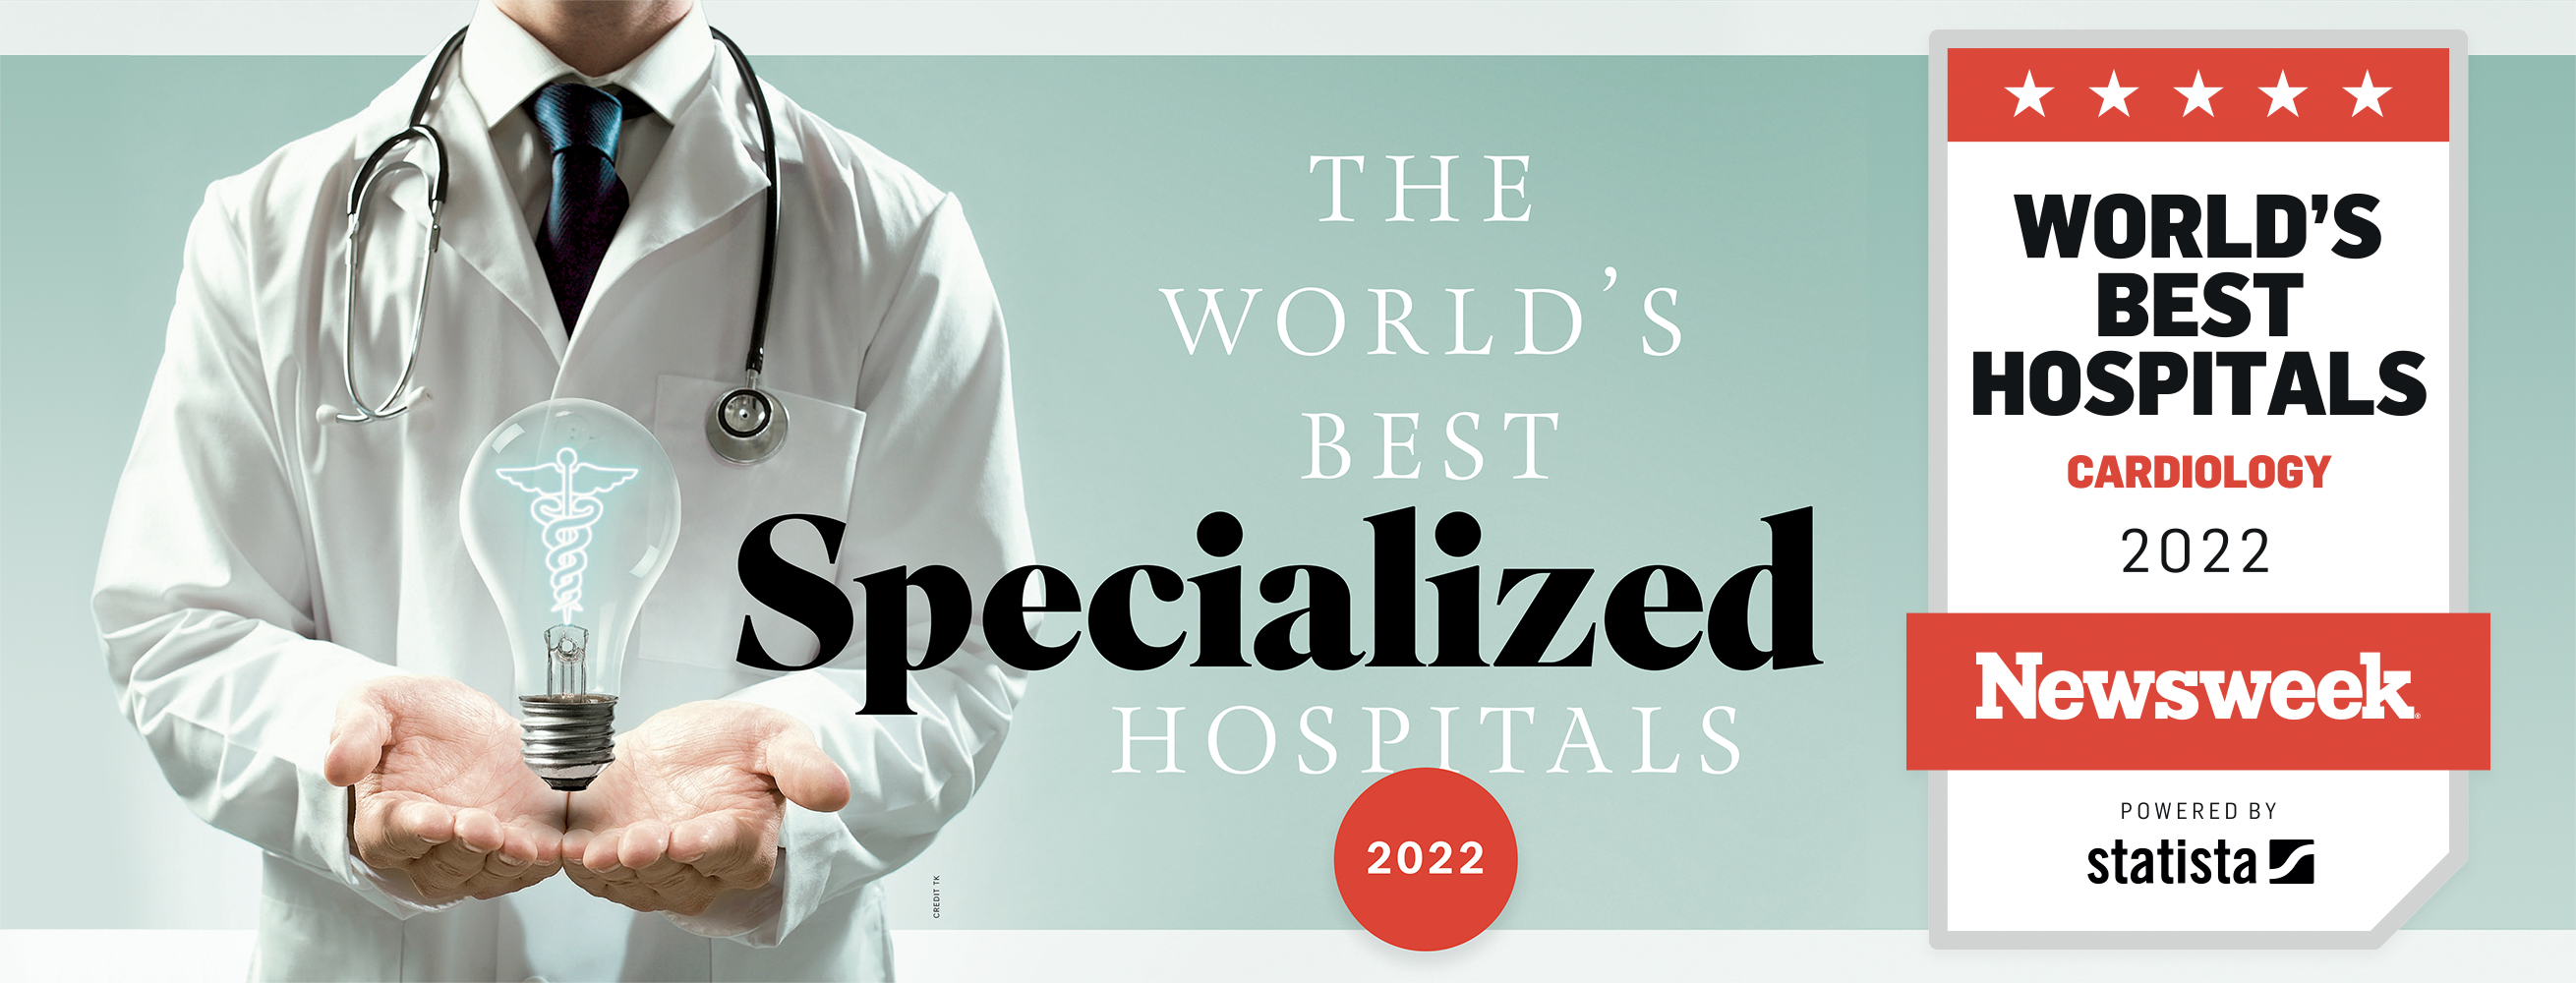 Best Specialized Hospitals 2022 Cardiology